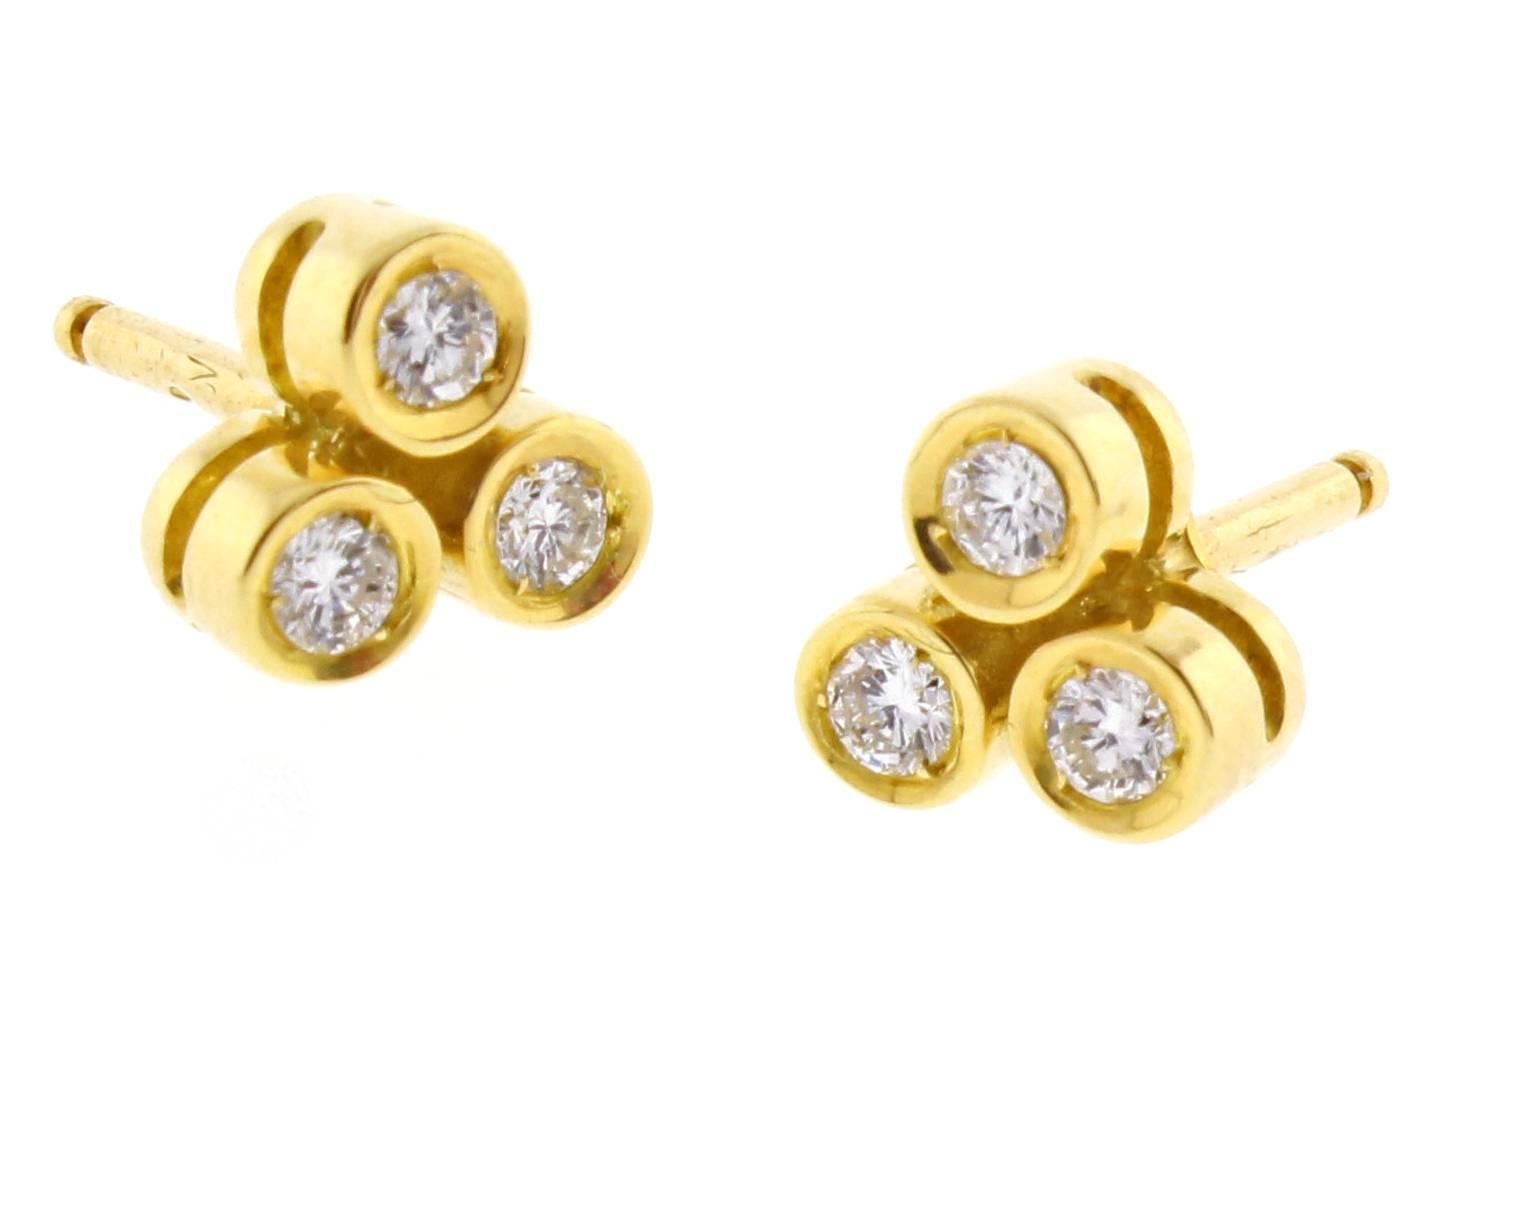 From Cartier their classic three diamond earring. Set with the diamond they are right for any occasion. 6 brilliant diamonds .30 carats self locking earring backs, set in 18 karat gold 